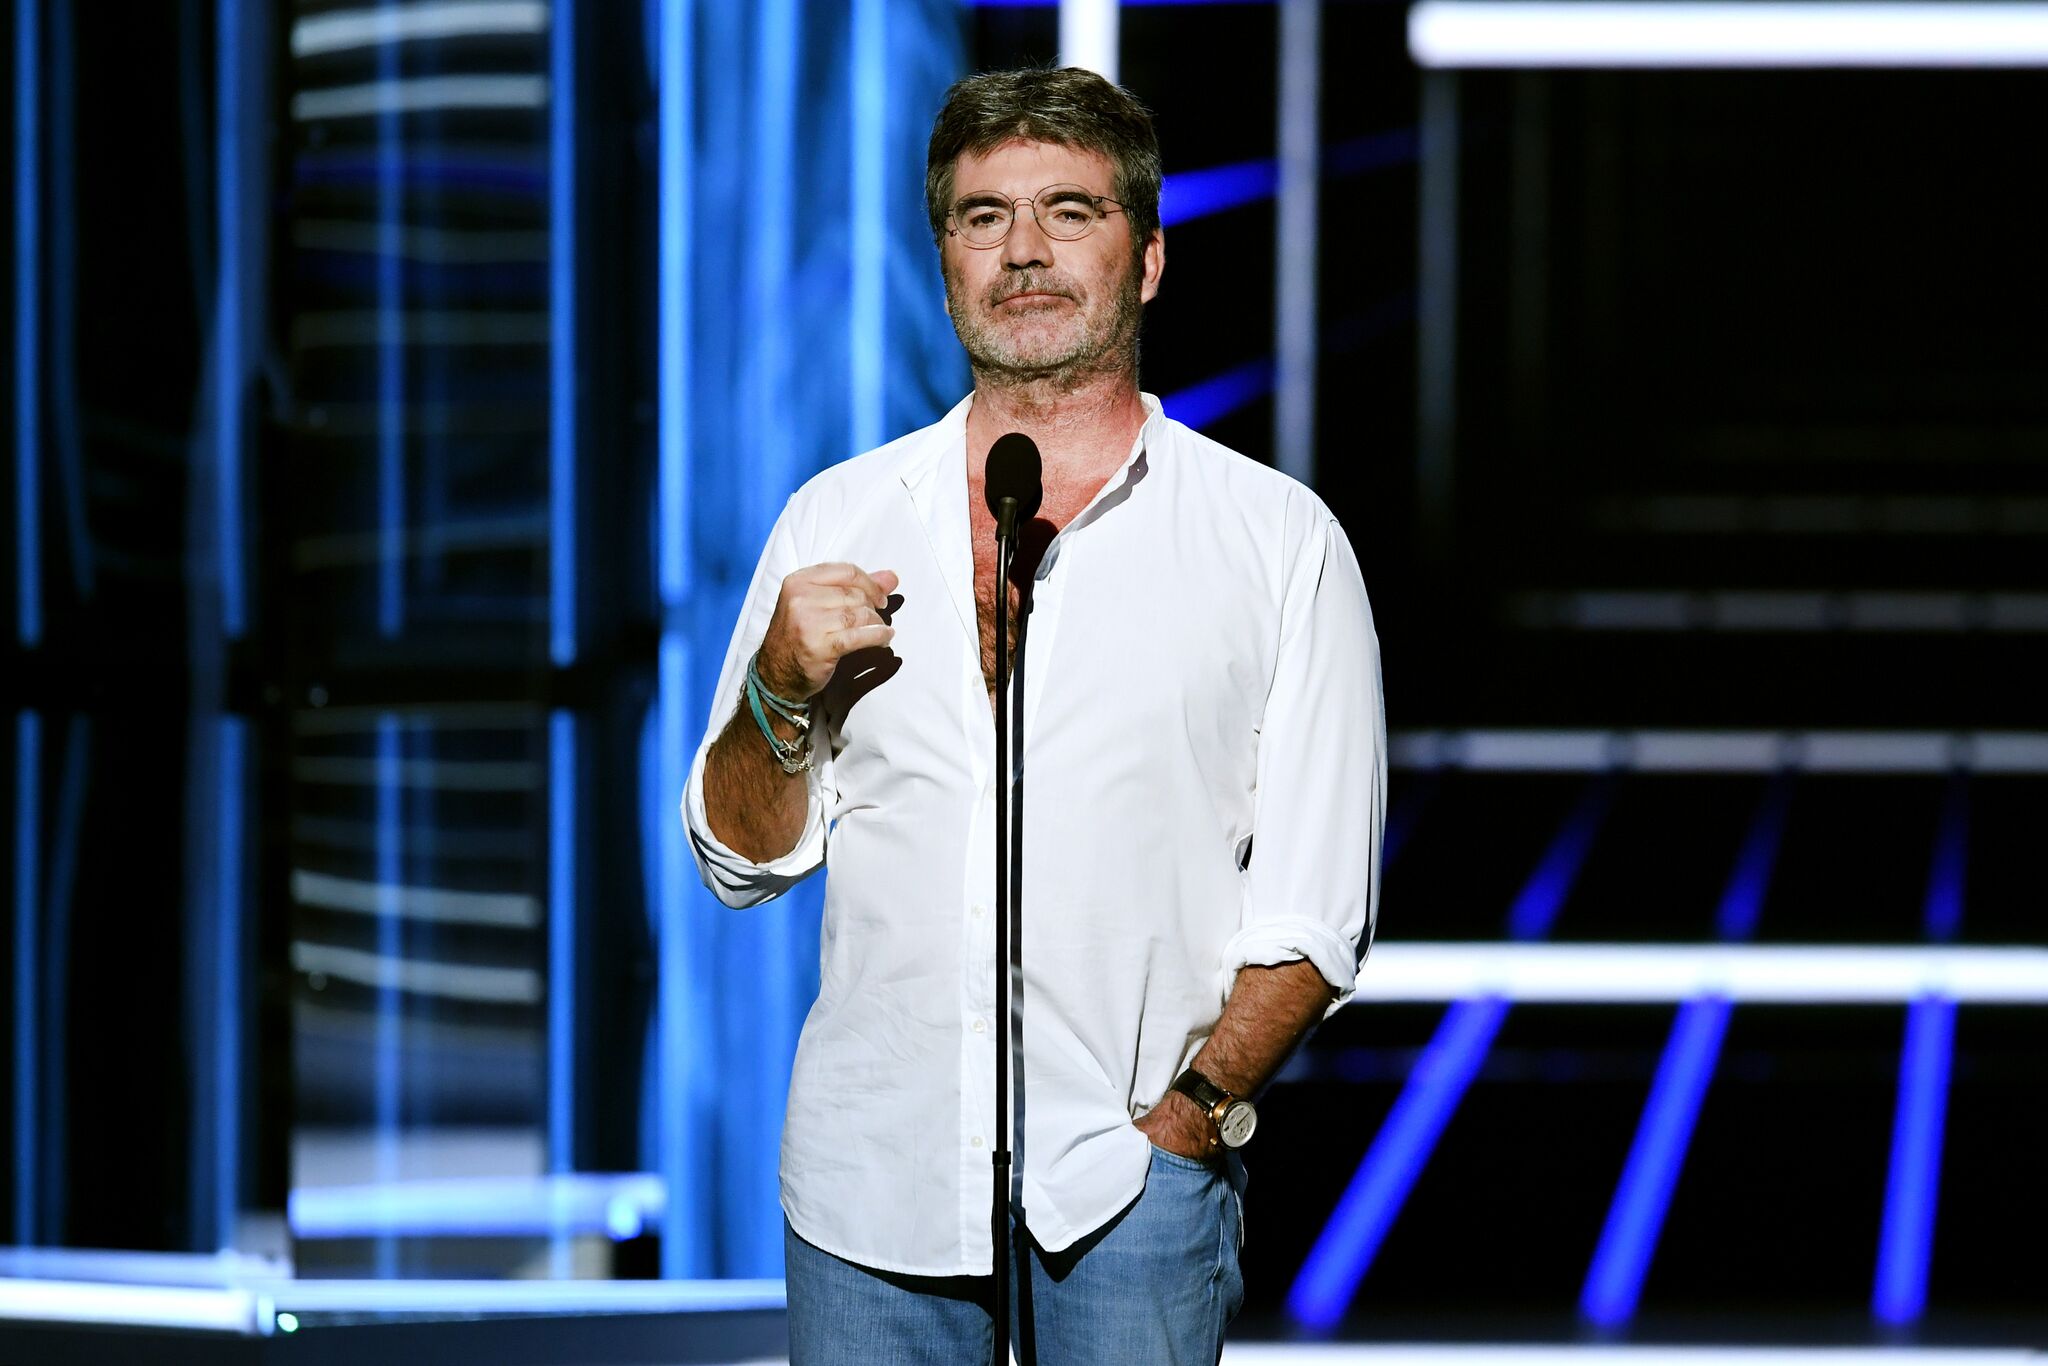 Simon Cowell speaks onstage during the 2018 Billboard Music Awards | Getty Images